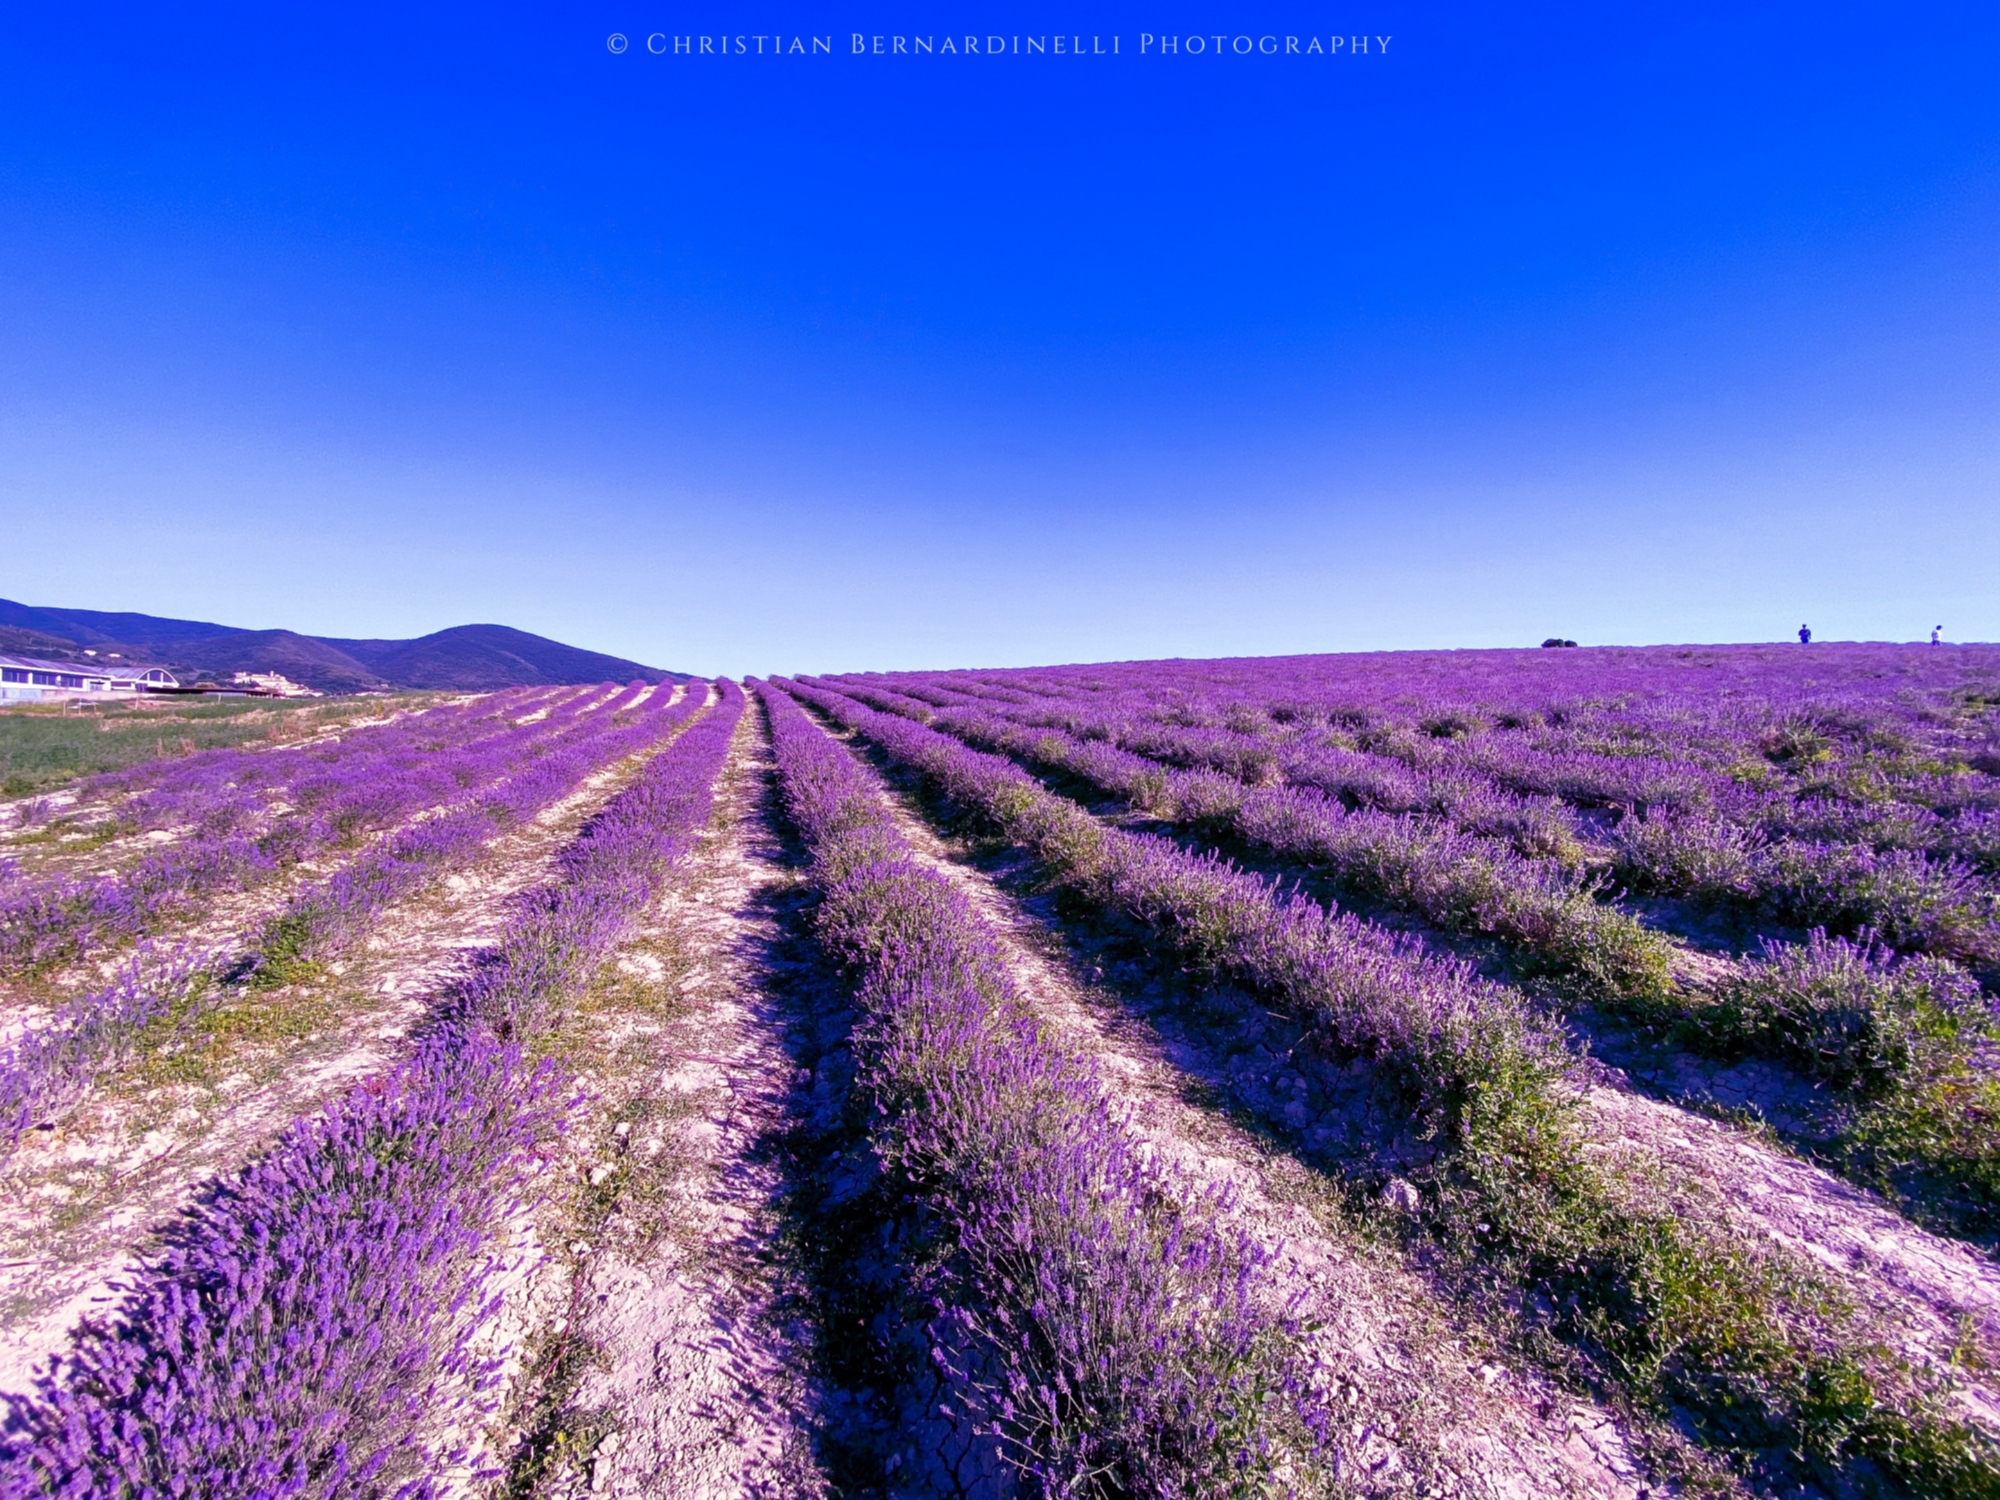 A special journey through the lavender fields in Tuscany | Visit Tuscany